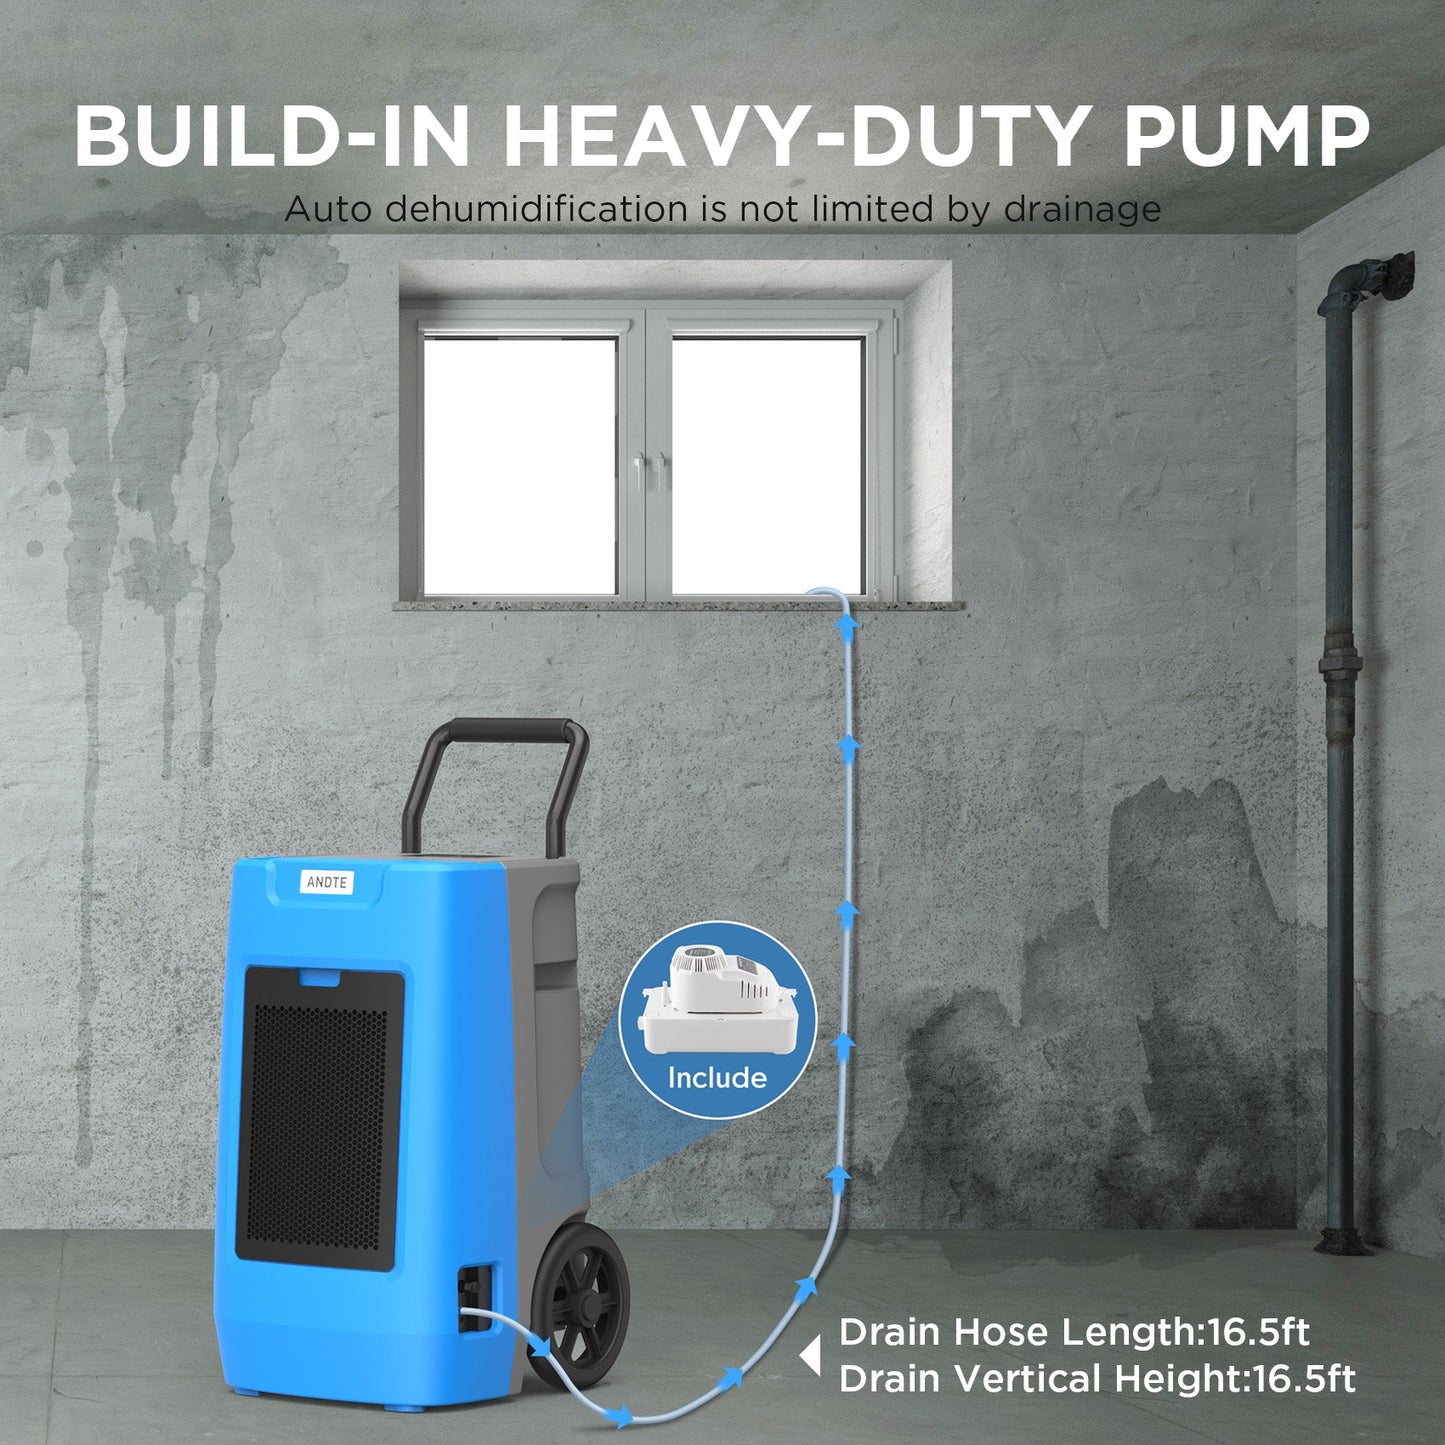 ANDTE 190 Pints Commercial Dehumidifier with Pump, Industrial Dehumidifier for Basements, Covers up to 2400 Sq.ft